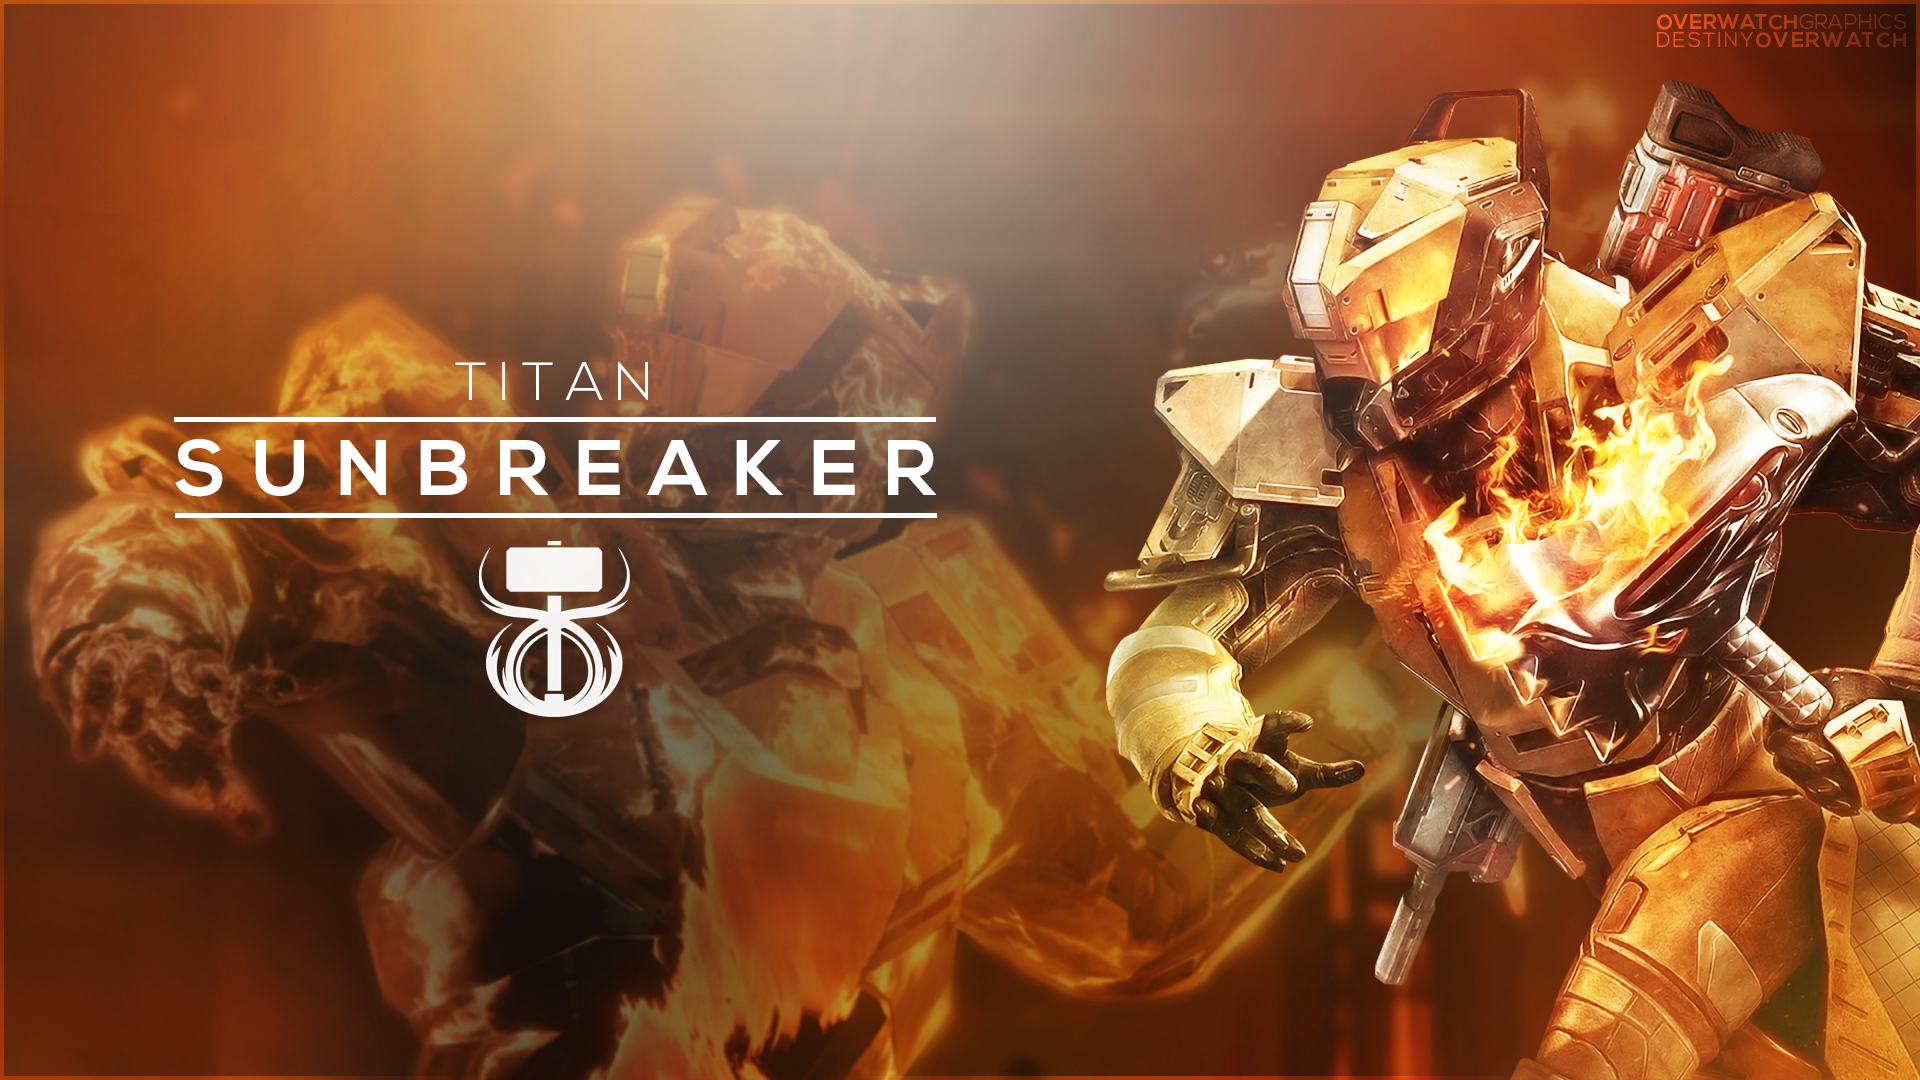 Destiny The Game Sunbreaker Wallpaper By Overwatchgraphics On